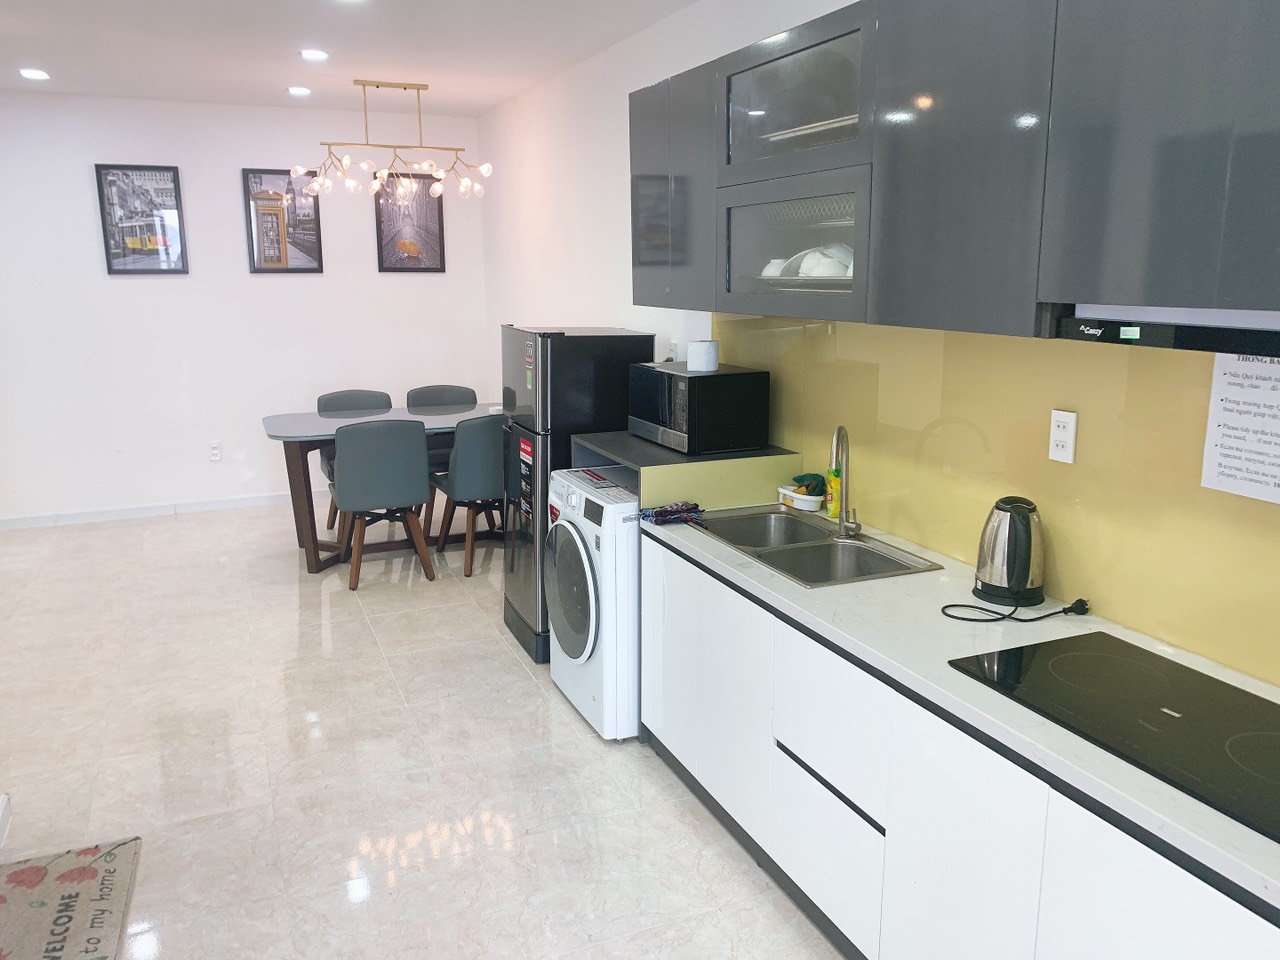 Muong Thanh Khanh Hoa for rent | 4 bedrooms Apartment | 15 million